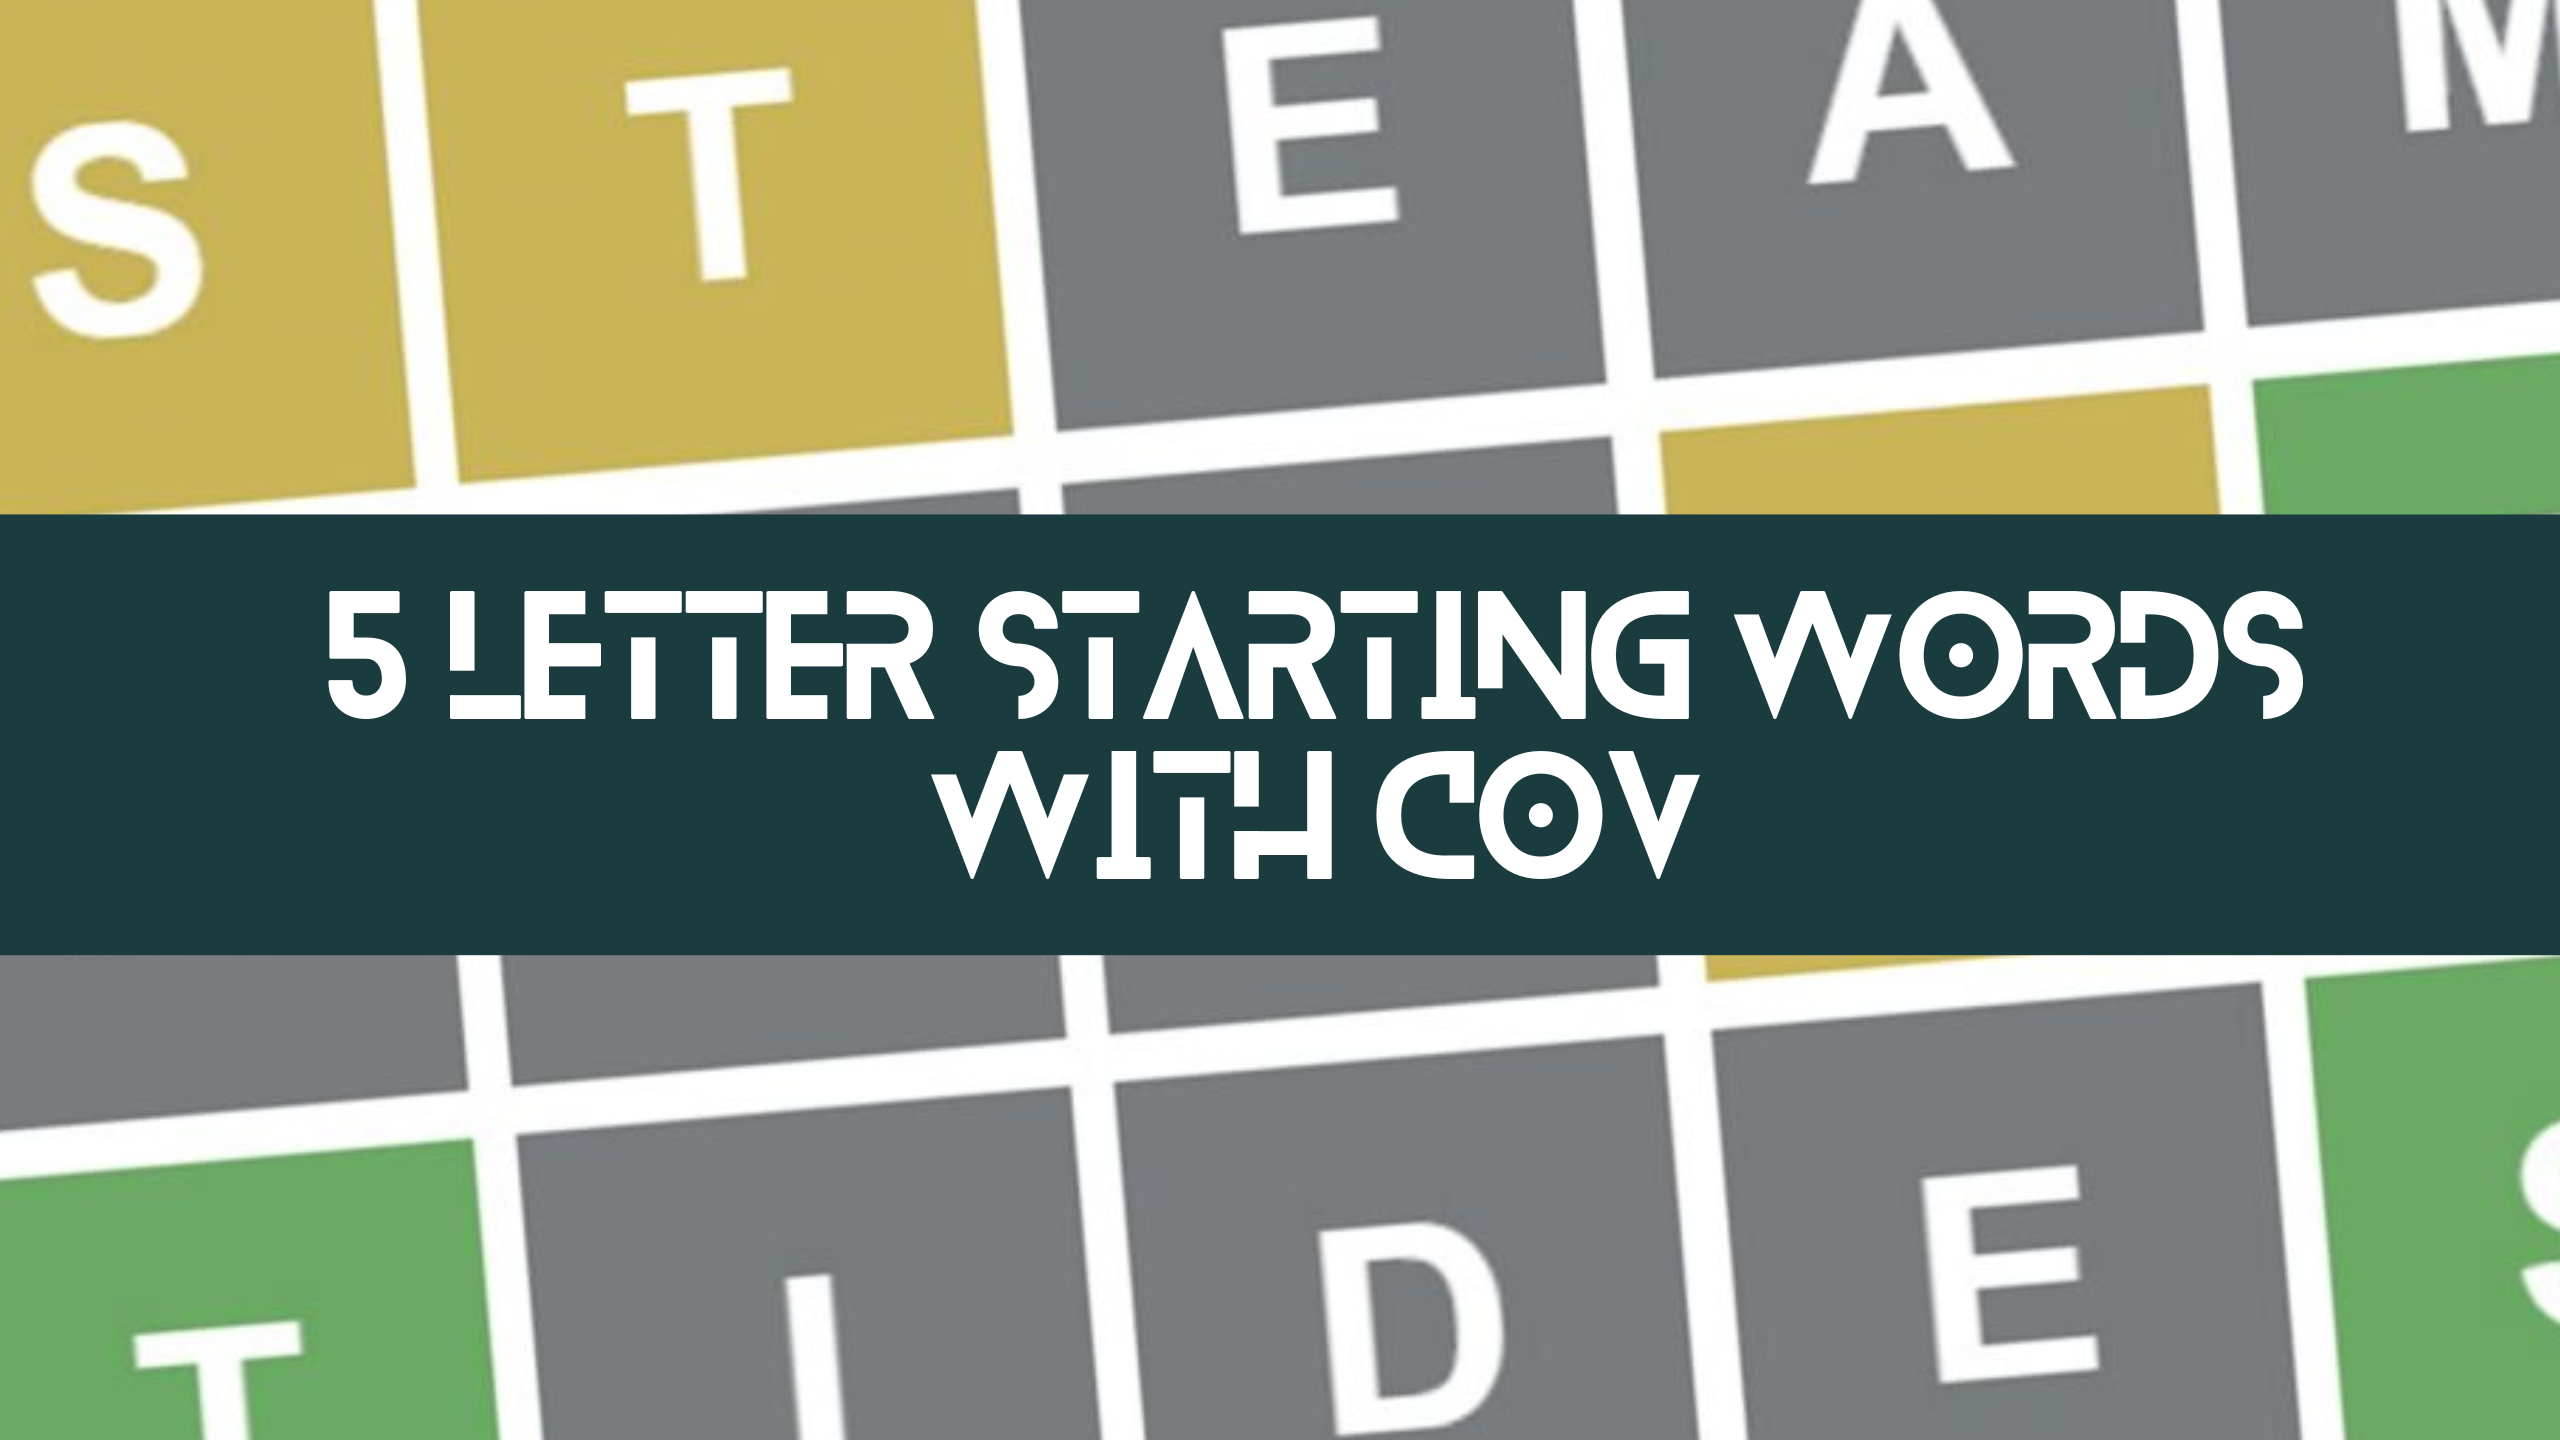 5 Letter Starting Words With COV